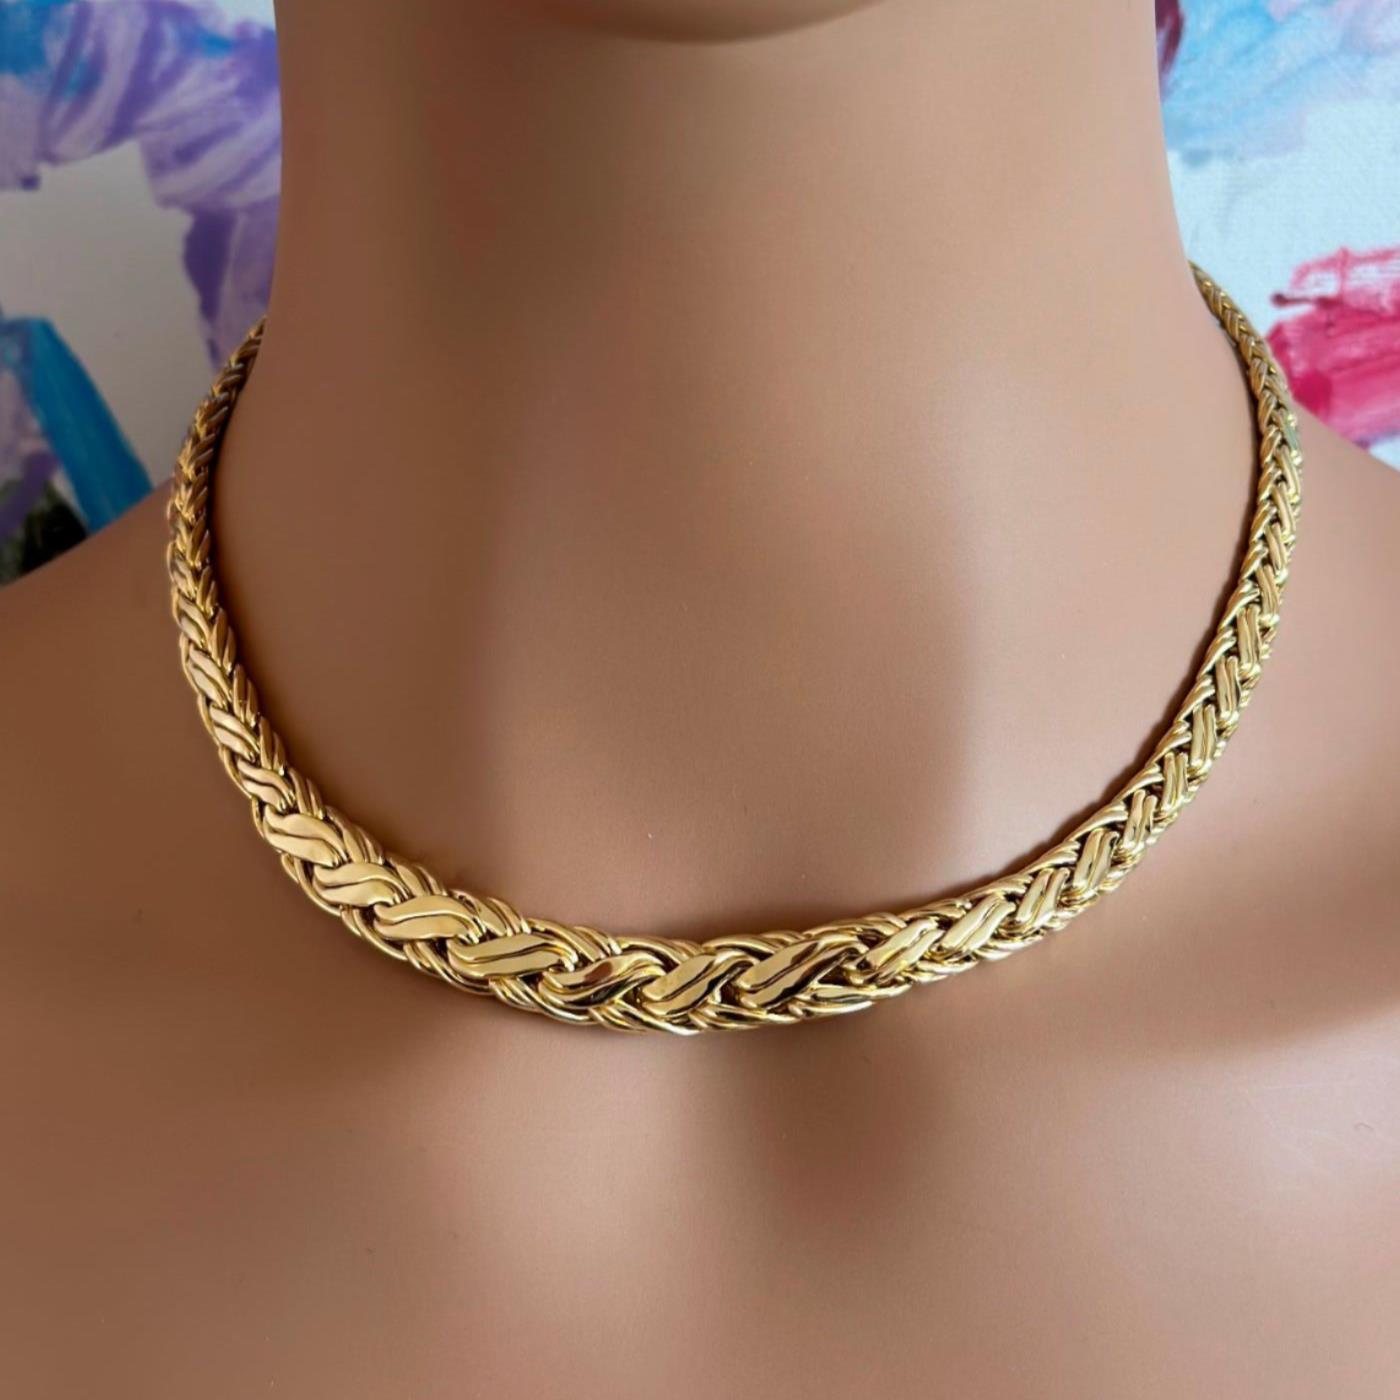 Tiffany & Co. Jewelry & Watches:Fine Jewelry:Necklaces & Pendants Vintage Tiffany & Co 18k Yellow Gold Russian Weave Gradual Link Necklace